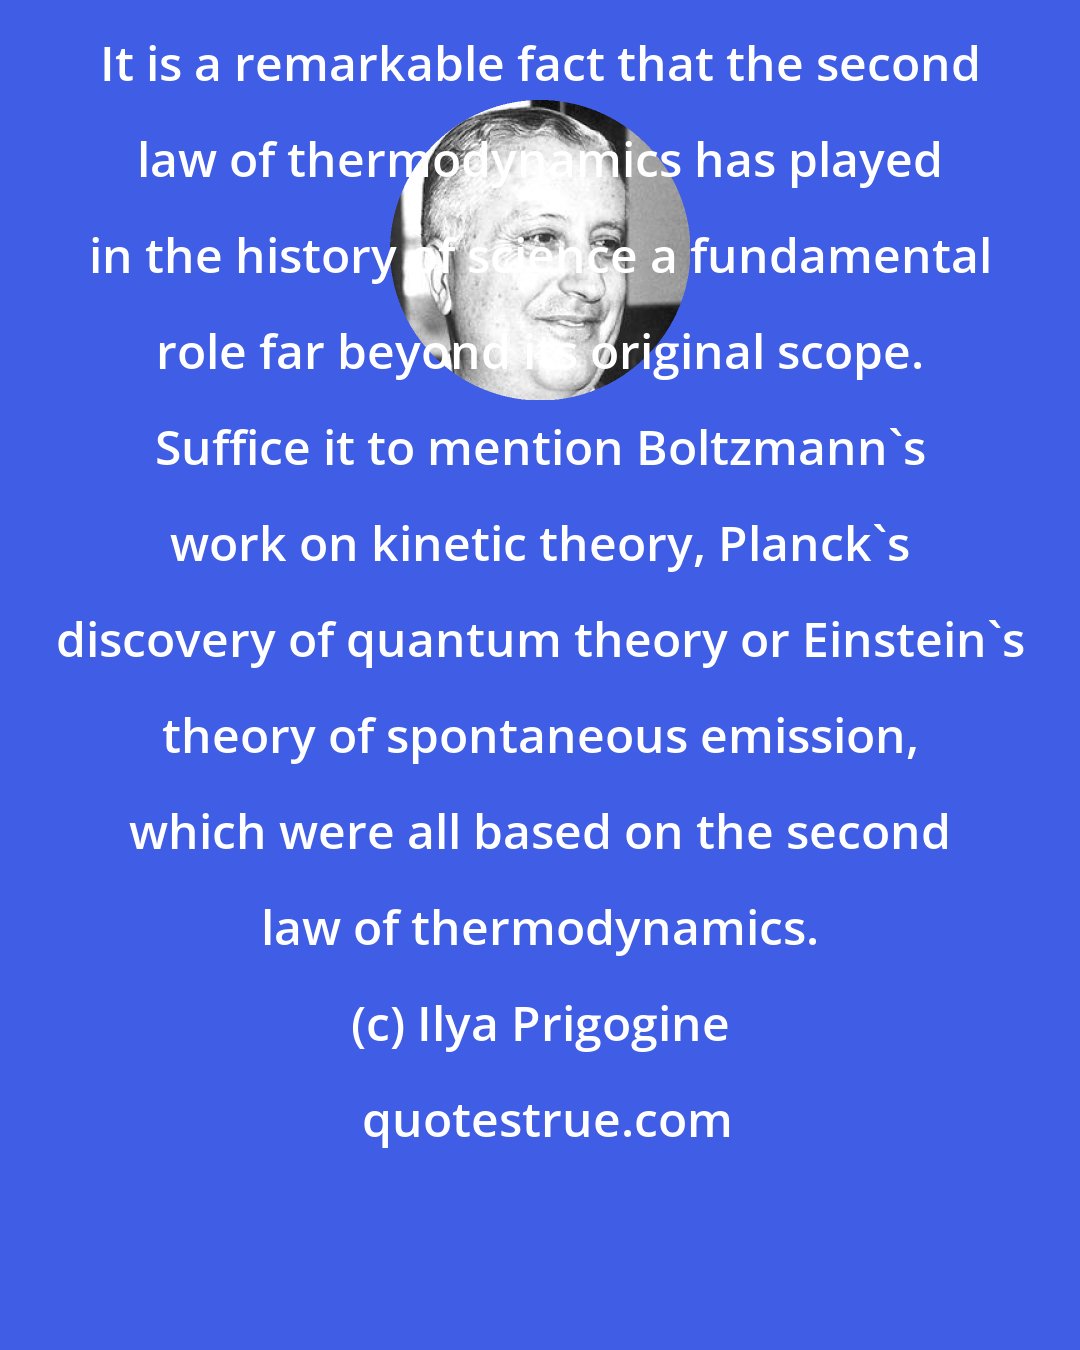 Ilya Prigogine: It is a remarkable fact that the second law of thermodynamics has played in the history of science a fundamental role far beyond its original scope. Suffice it to mention Boltzmann's work on kinetic theory, Planck's discovery of quantum theory or Einstein's theory of spontaneous emission, which were all based on the second law of thermodynamics.